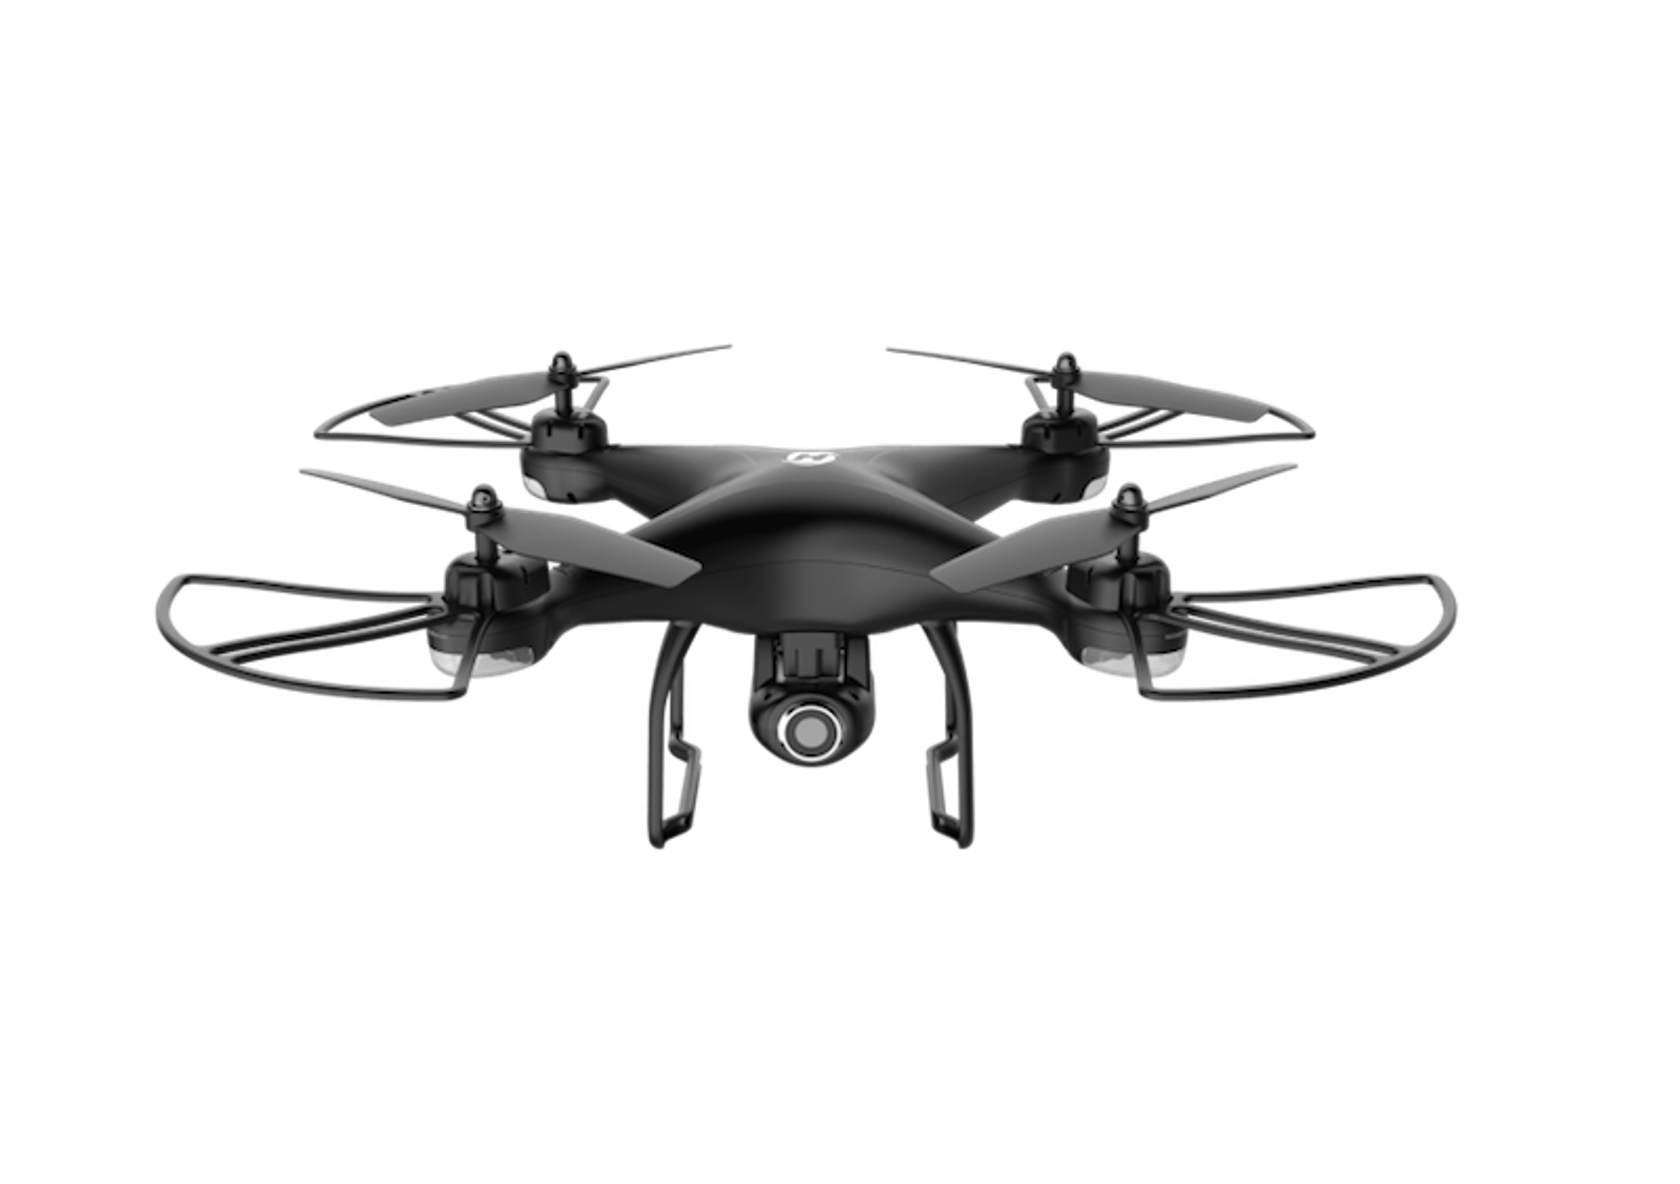 Top Drones Under $200: Best Picks for Budget Enthusiasts